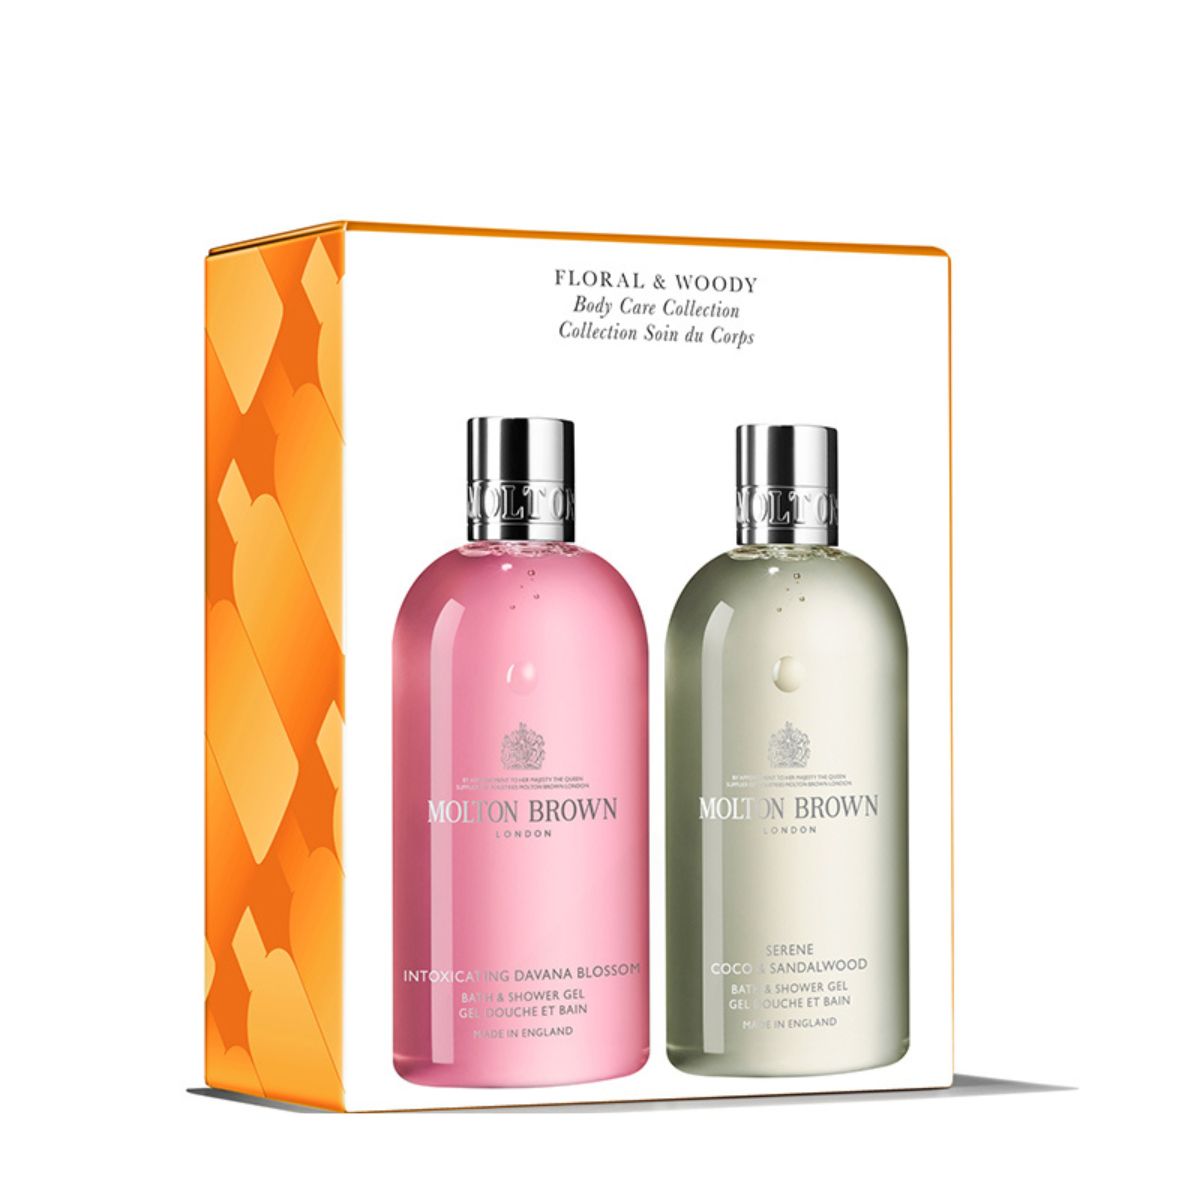 Molton Brown Floral & Woody Body Care Collection SAVE 32%